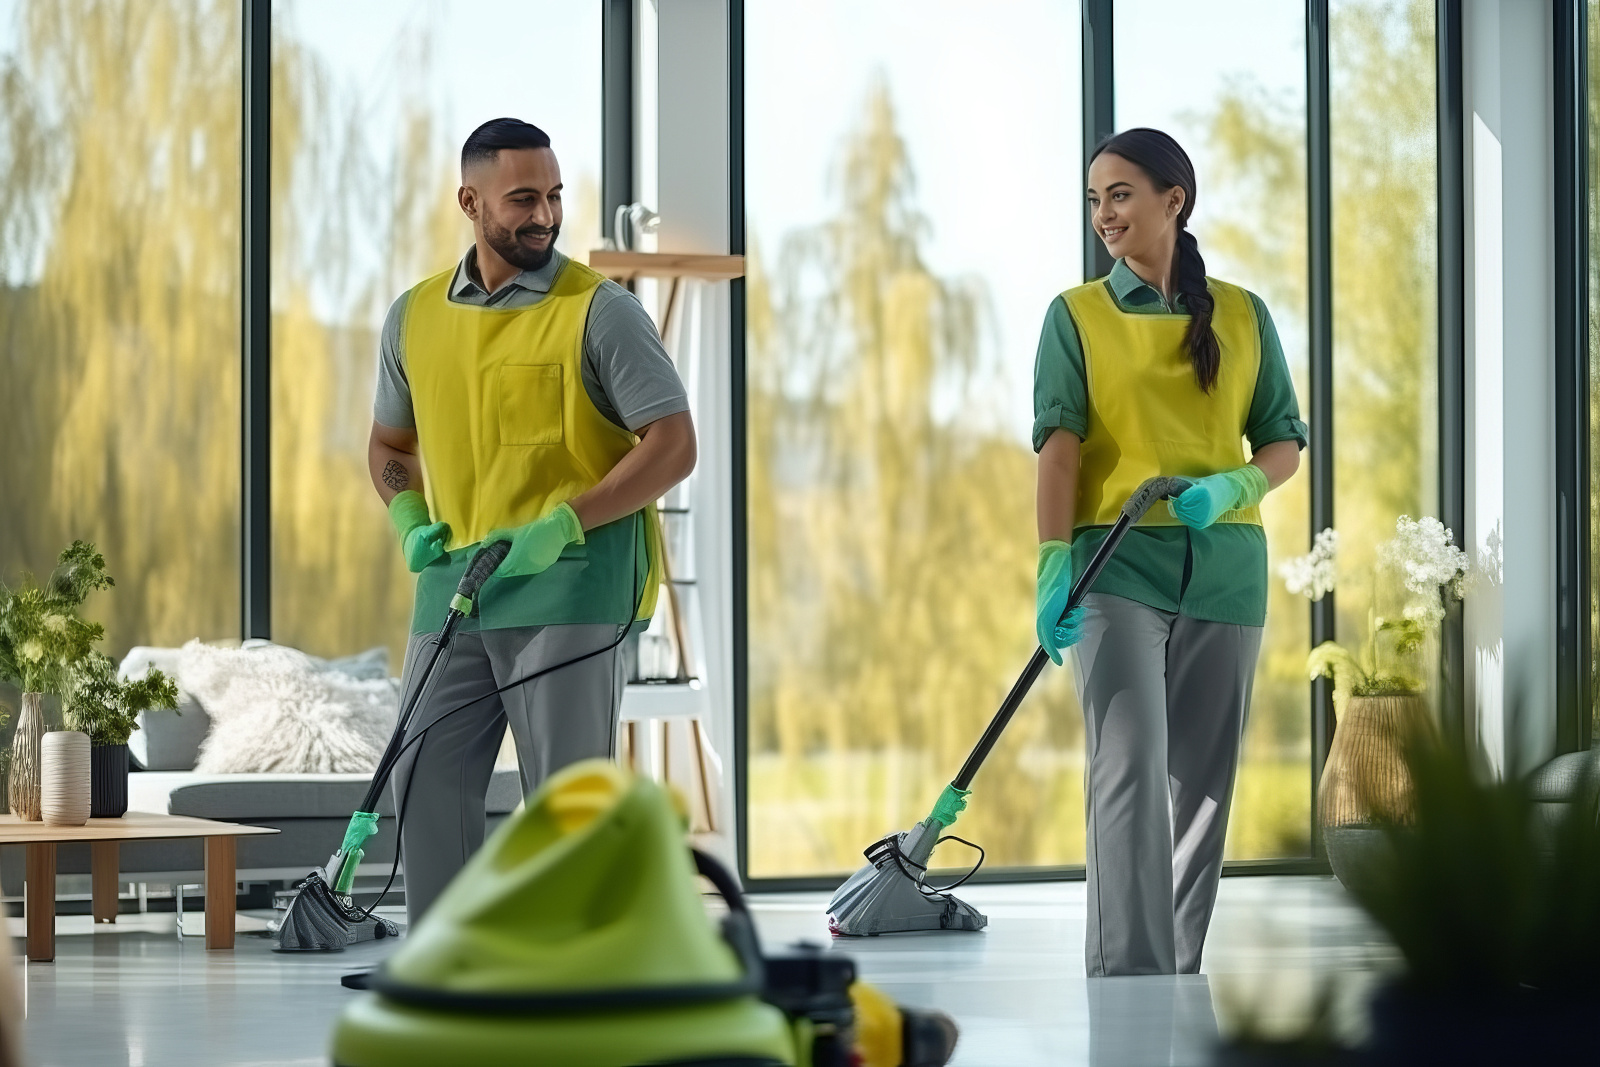 Two cleaners cleaning the floor of large office lobby